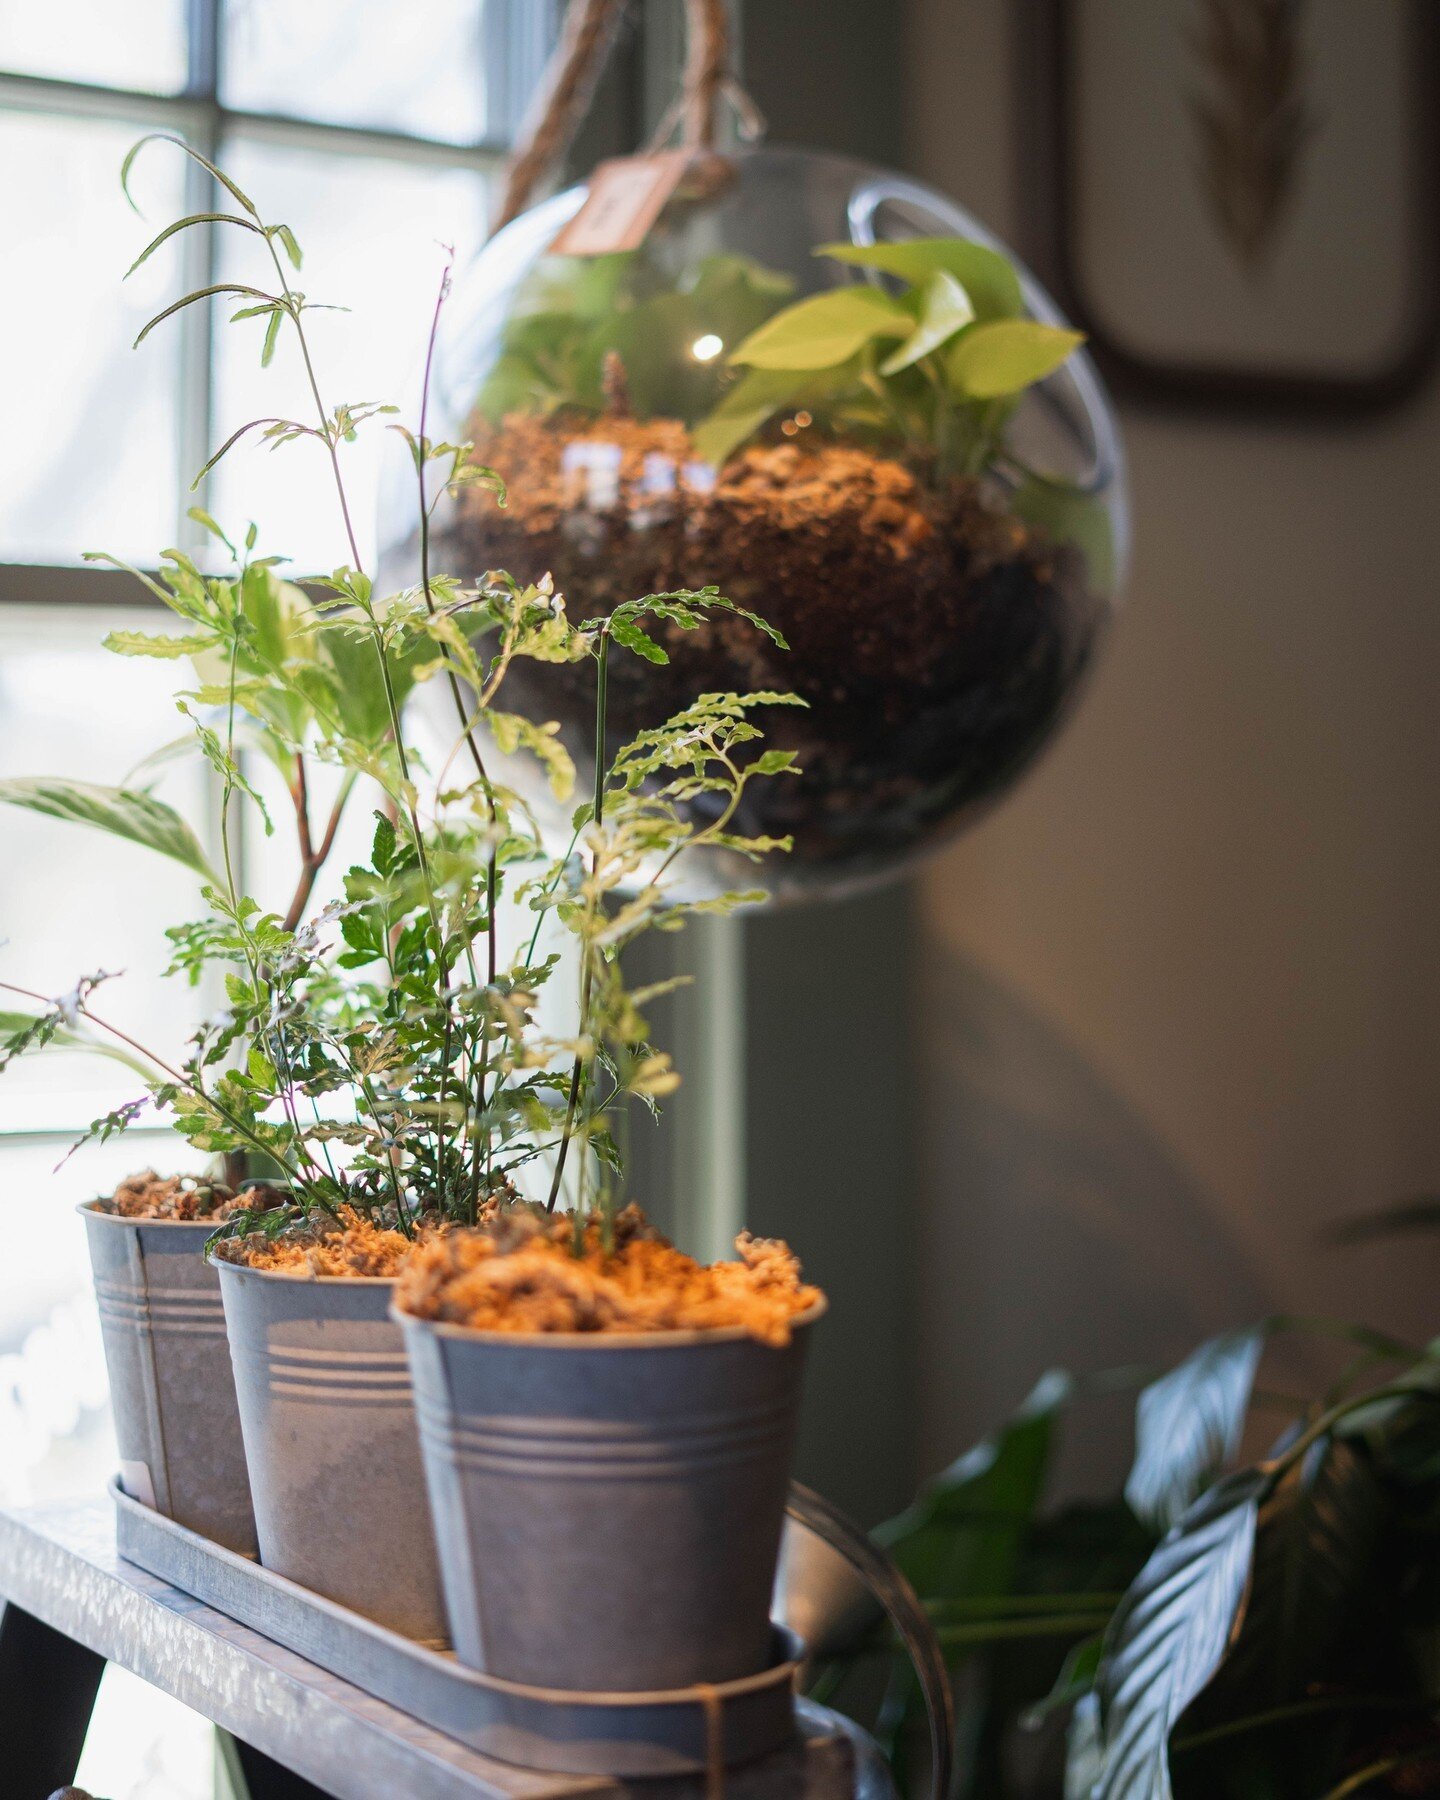 It&rsquo;s time to get growing!  Your plants will thank you for giving them the home they need to thrive. Choose from a variety of durable planters and glass terrariums at our Garden + Home store.